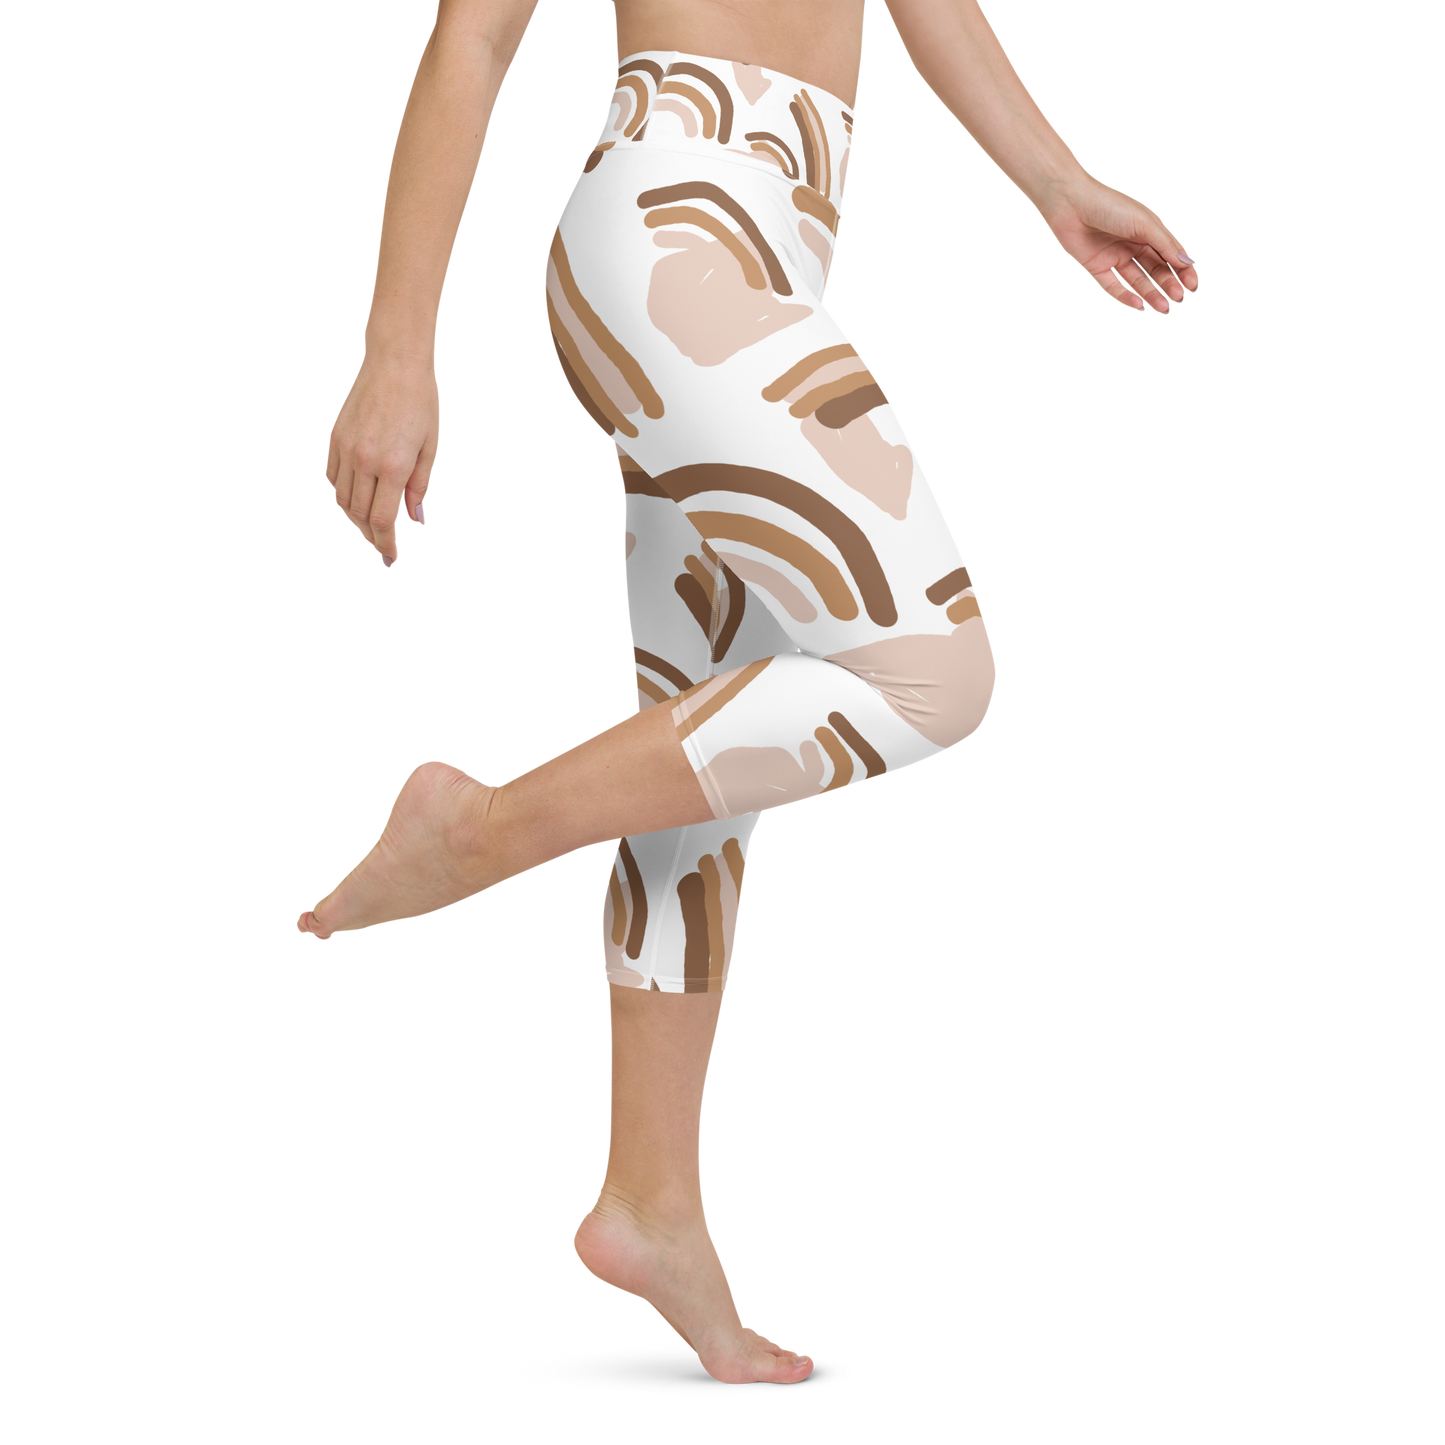 Brown & White Shapes | Abstract Patterns | All-Over Print Yoga Capri Leggings - #4